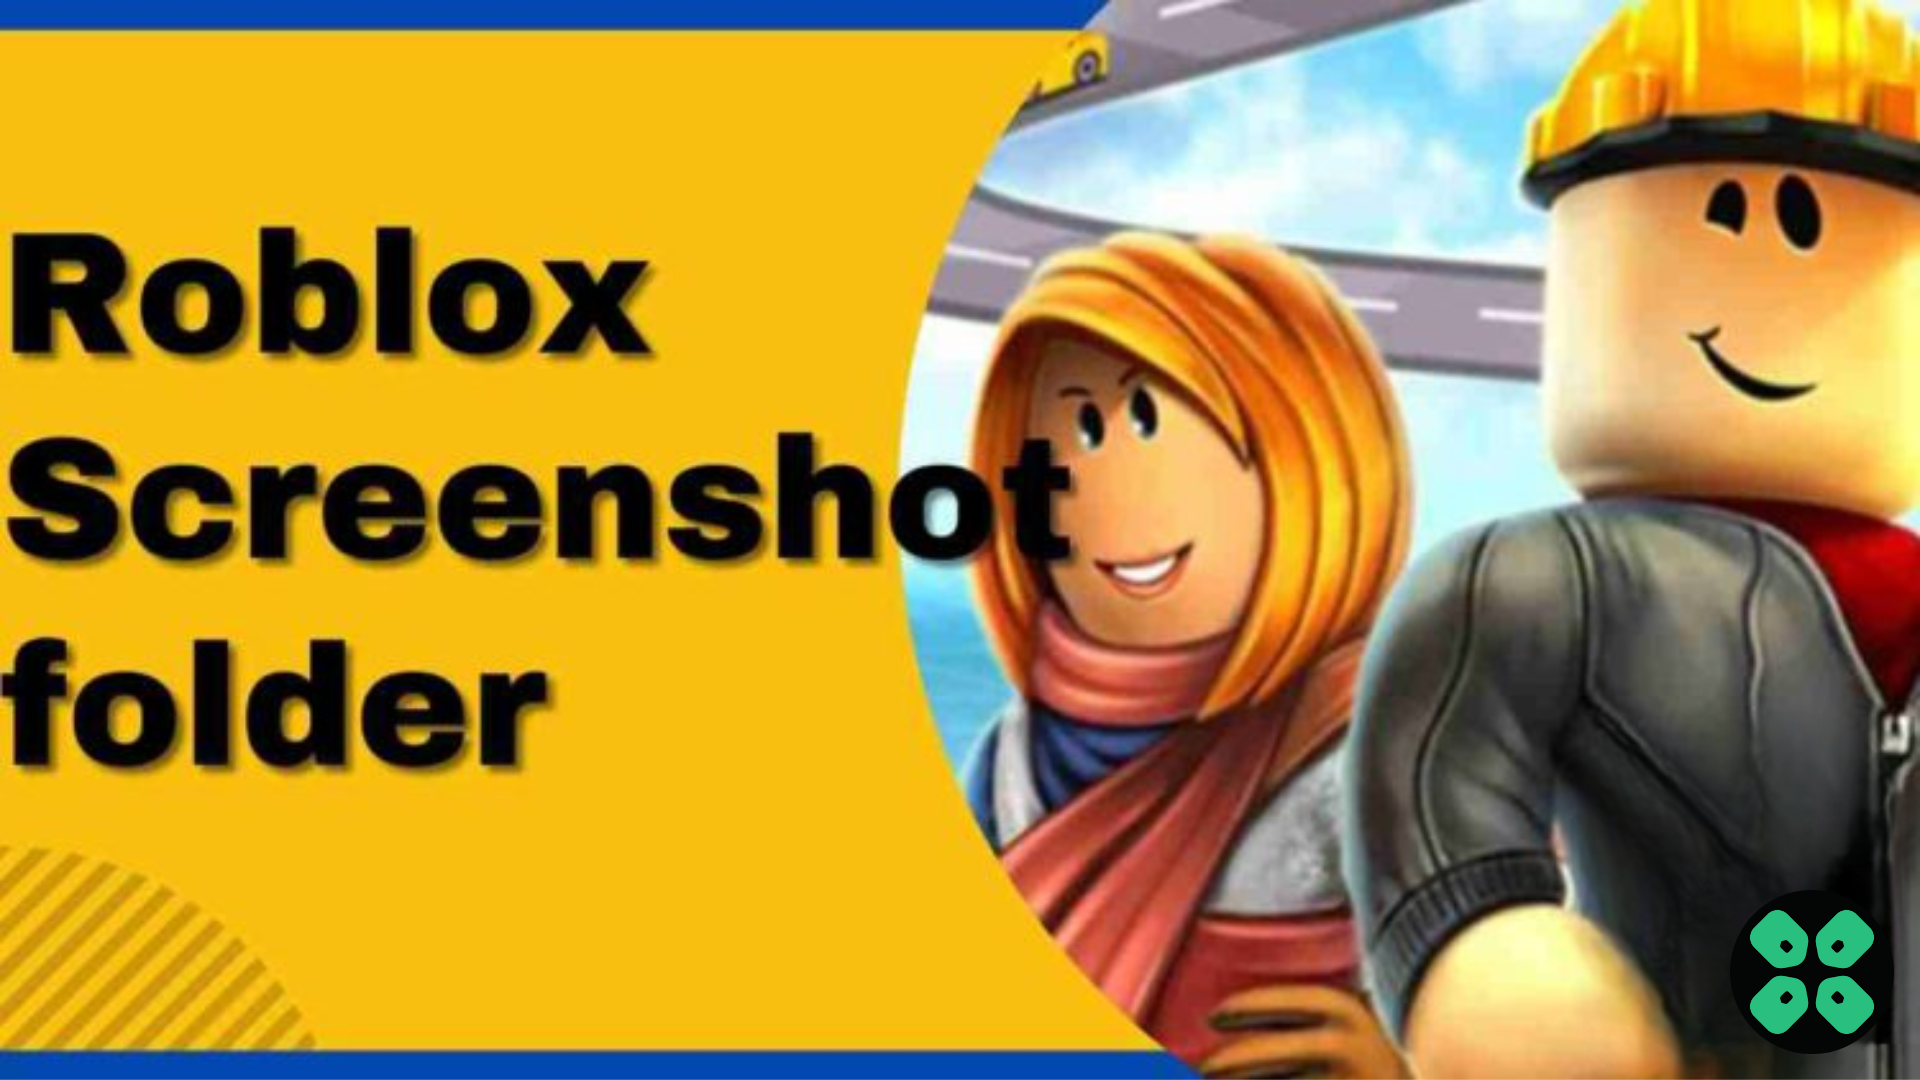 How to find the Roblox Screenshot Folder on Windows PC